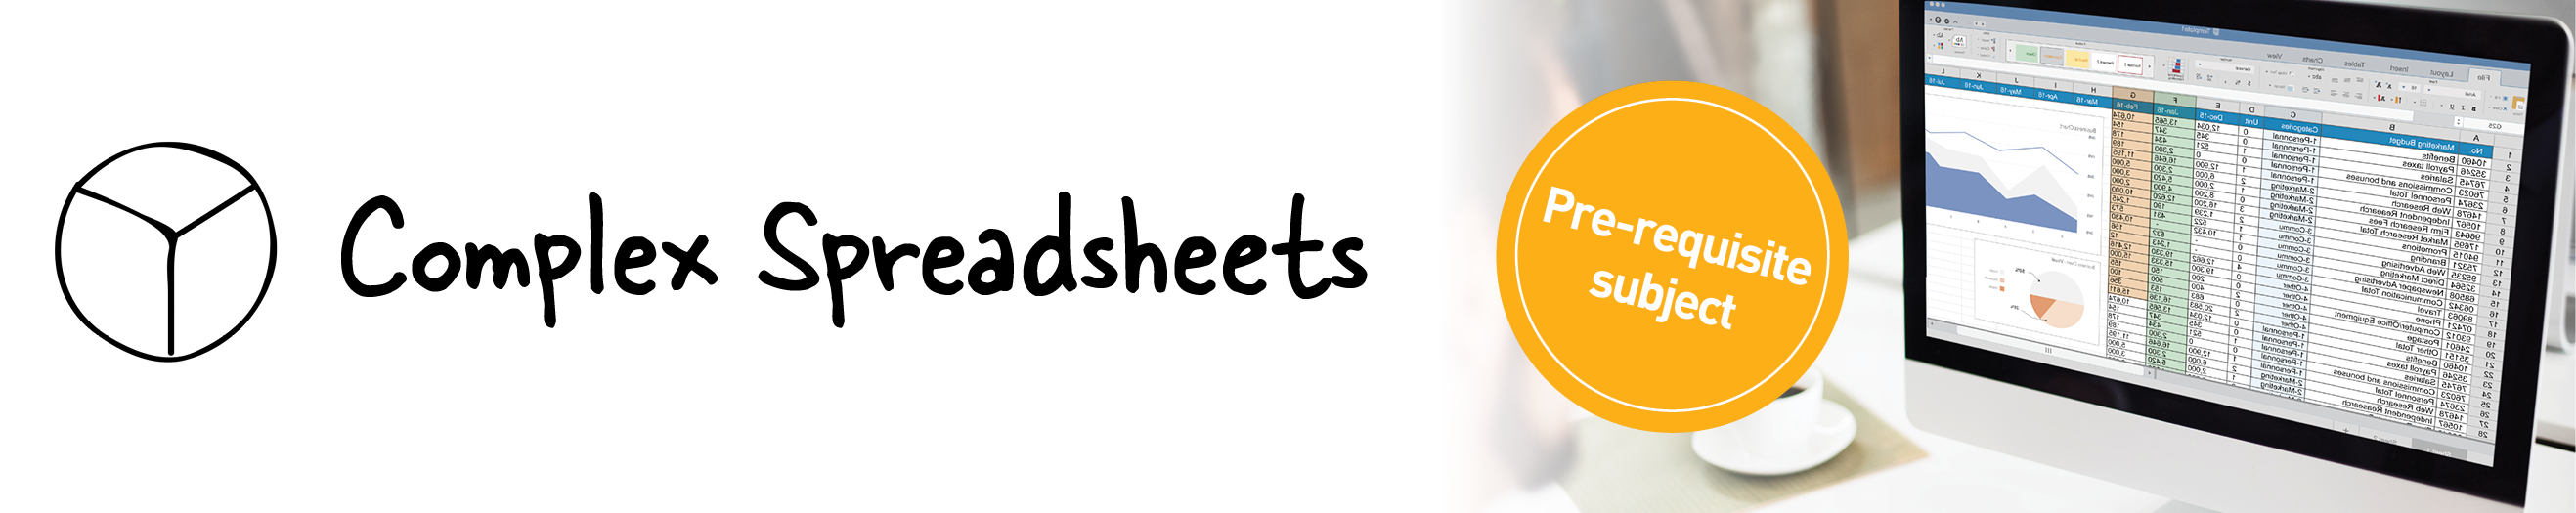 Complex Spreadsheets